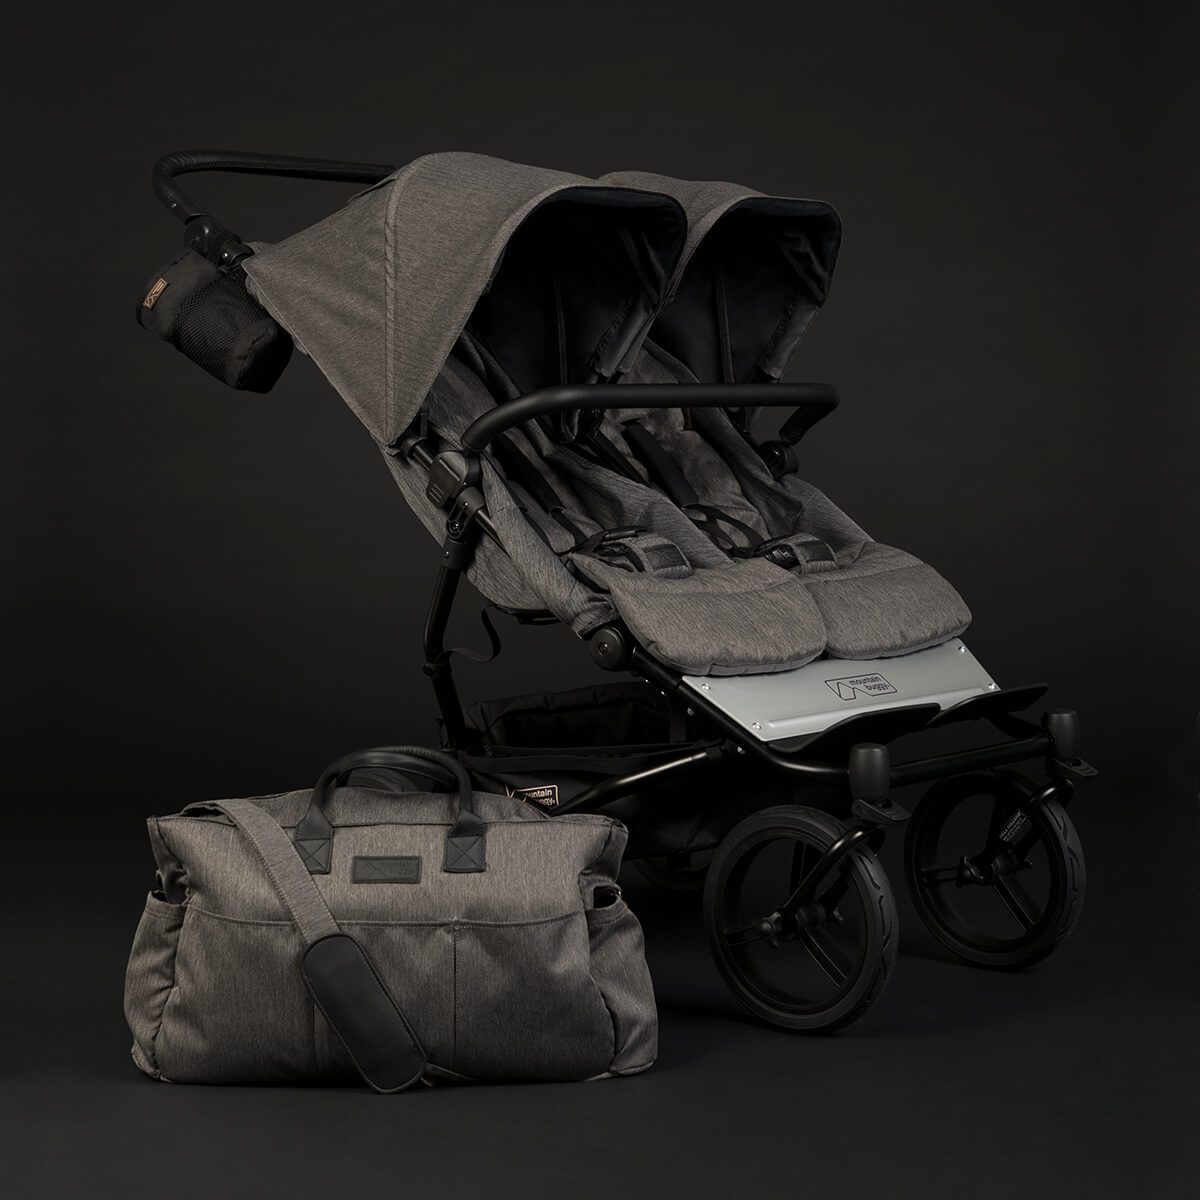 mountain buggy duet black friday